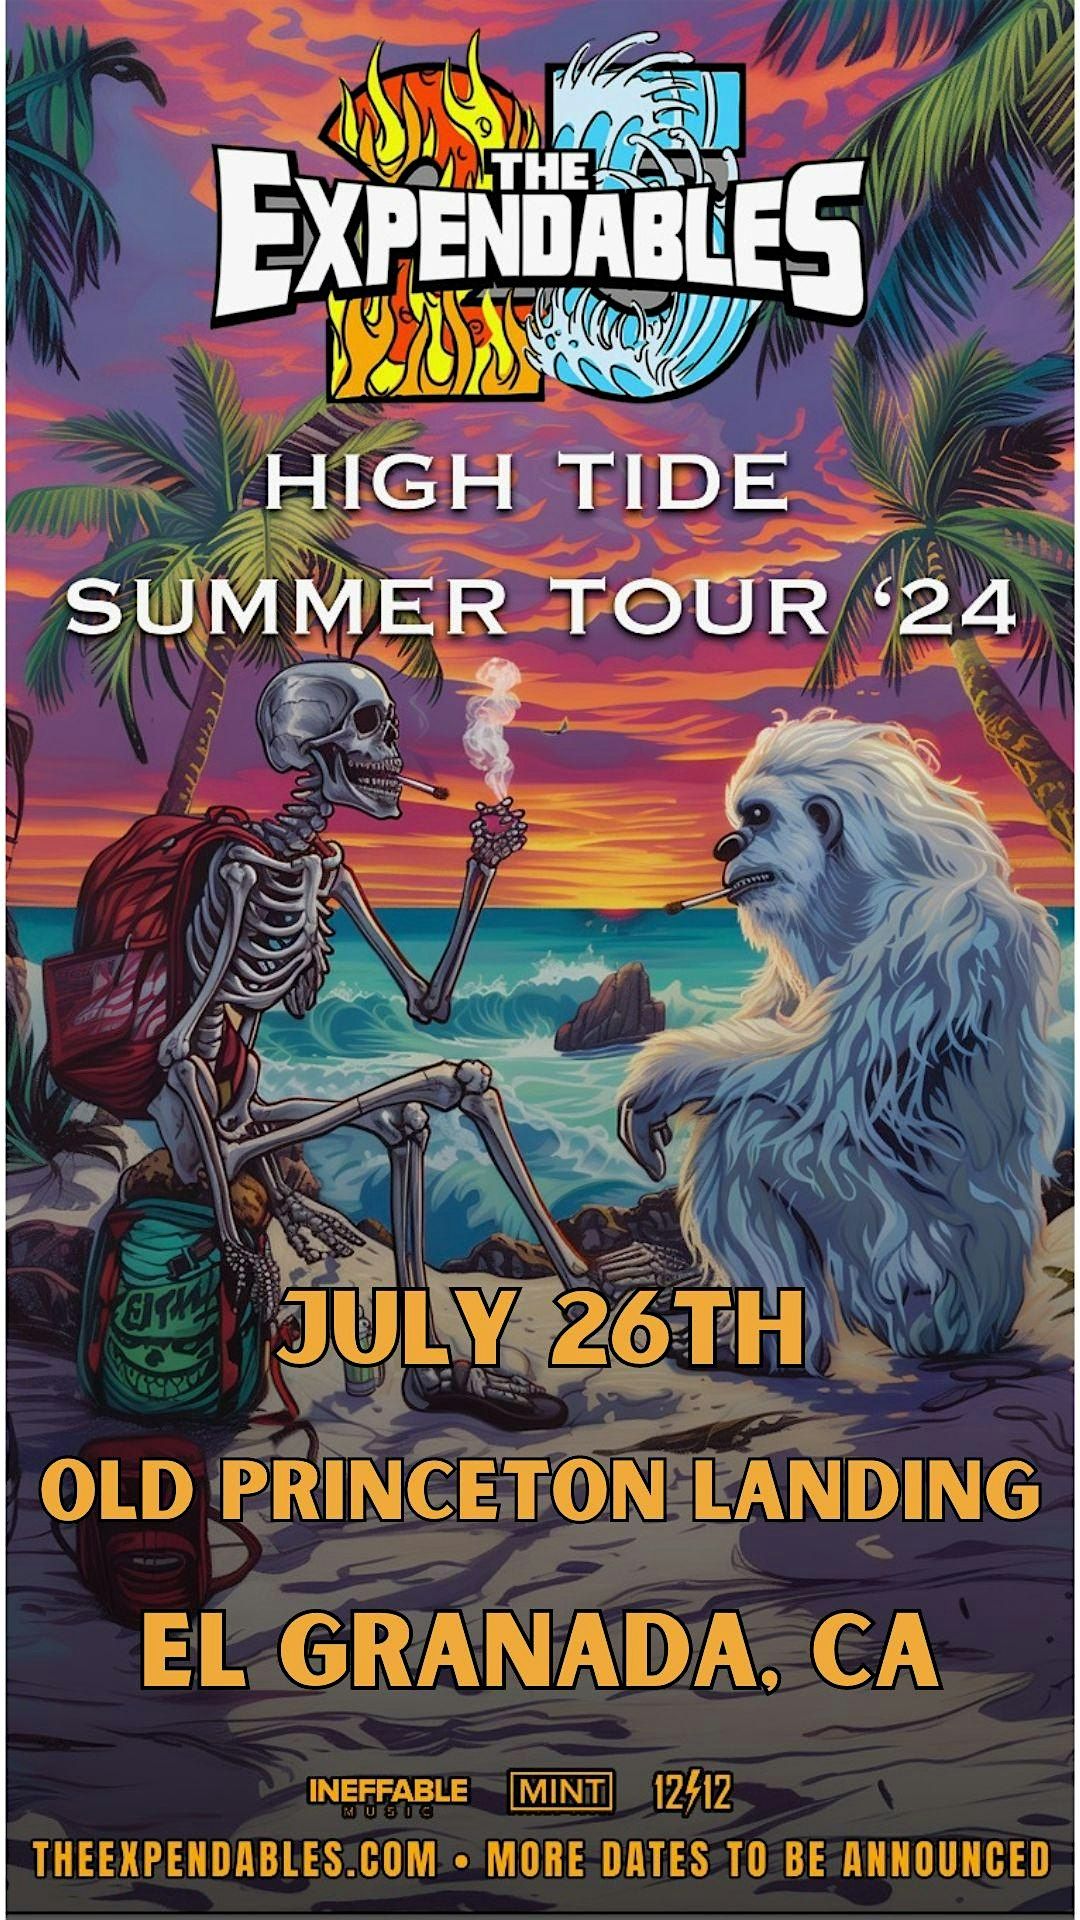 The Expendables High Tide Summer Tour '24